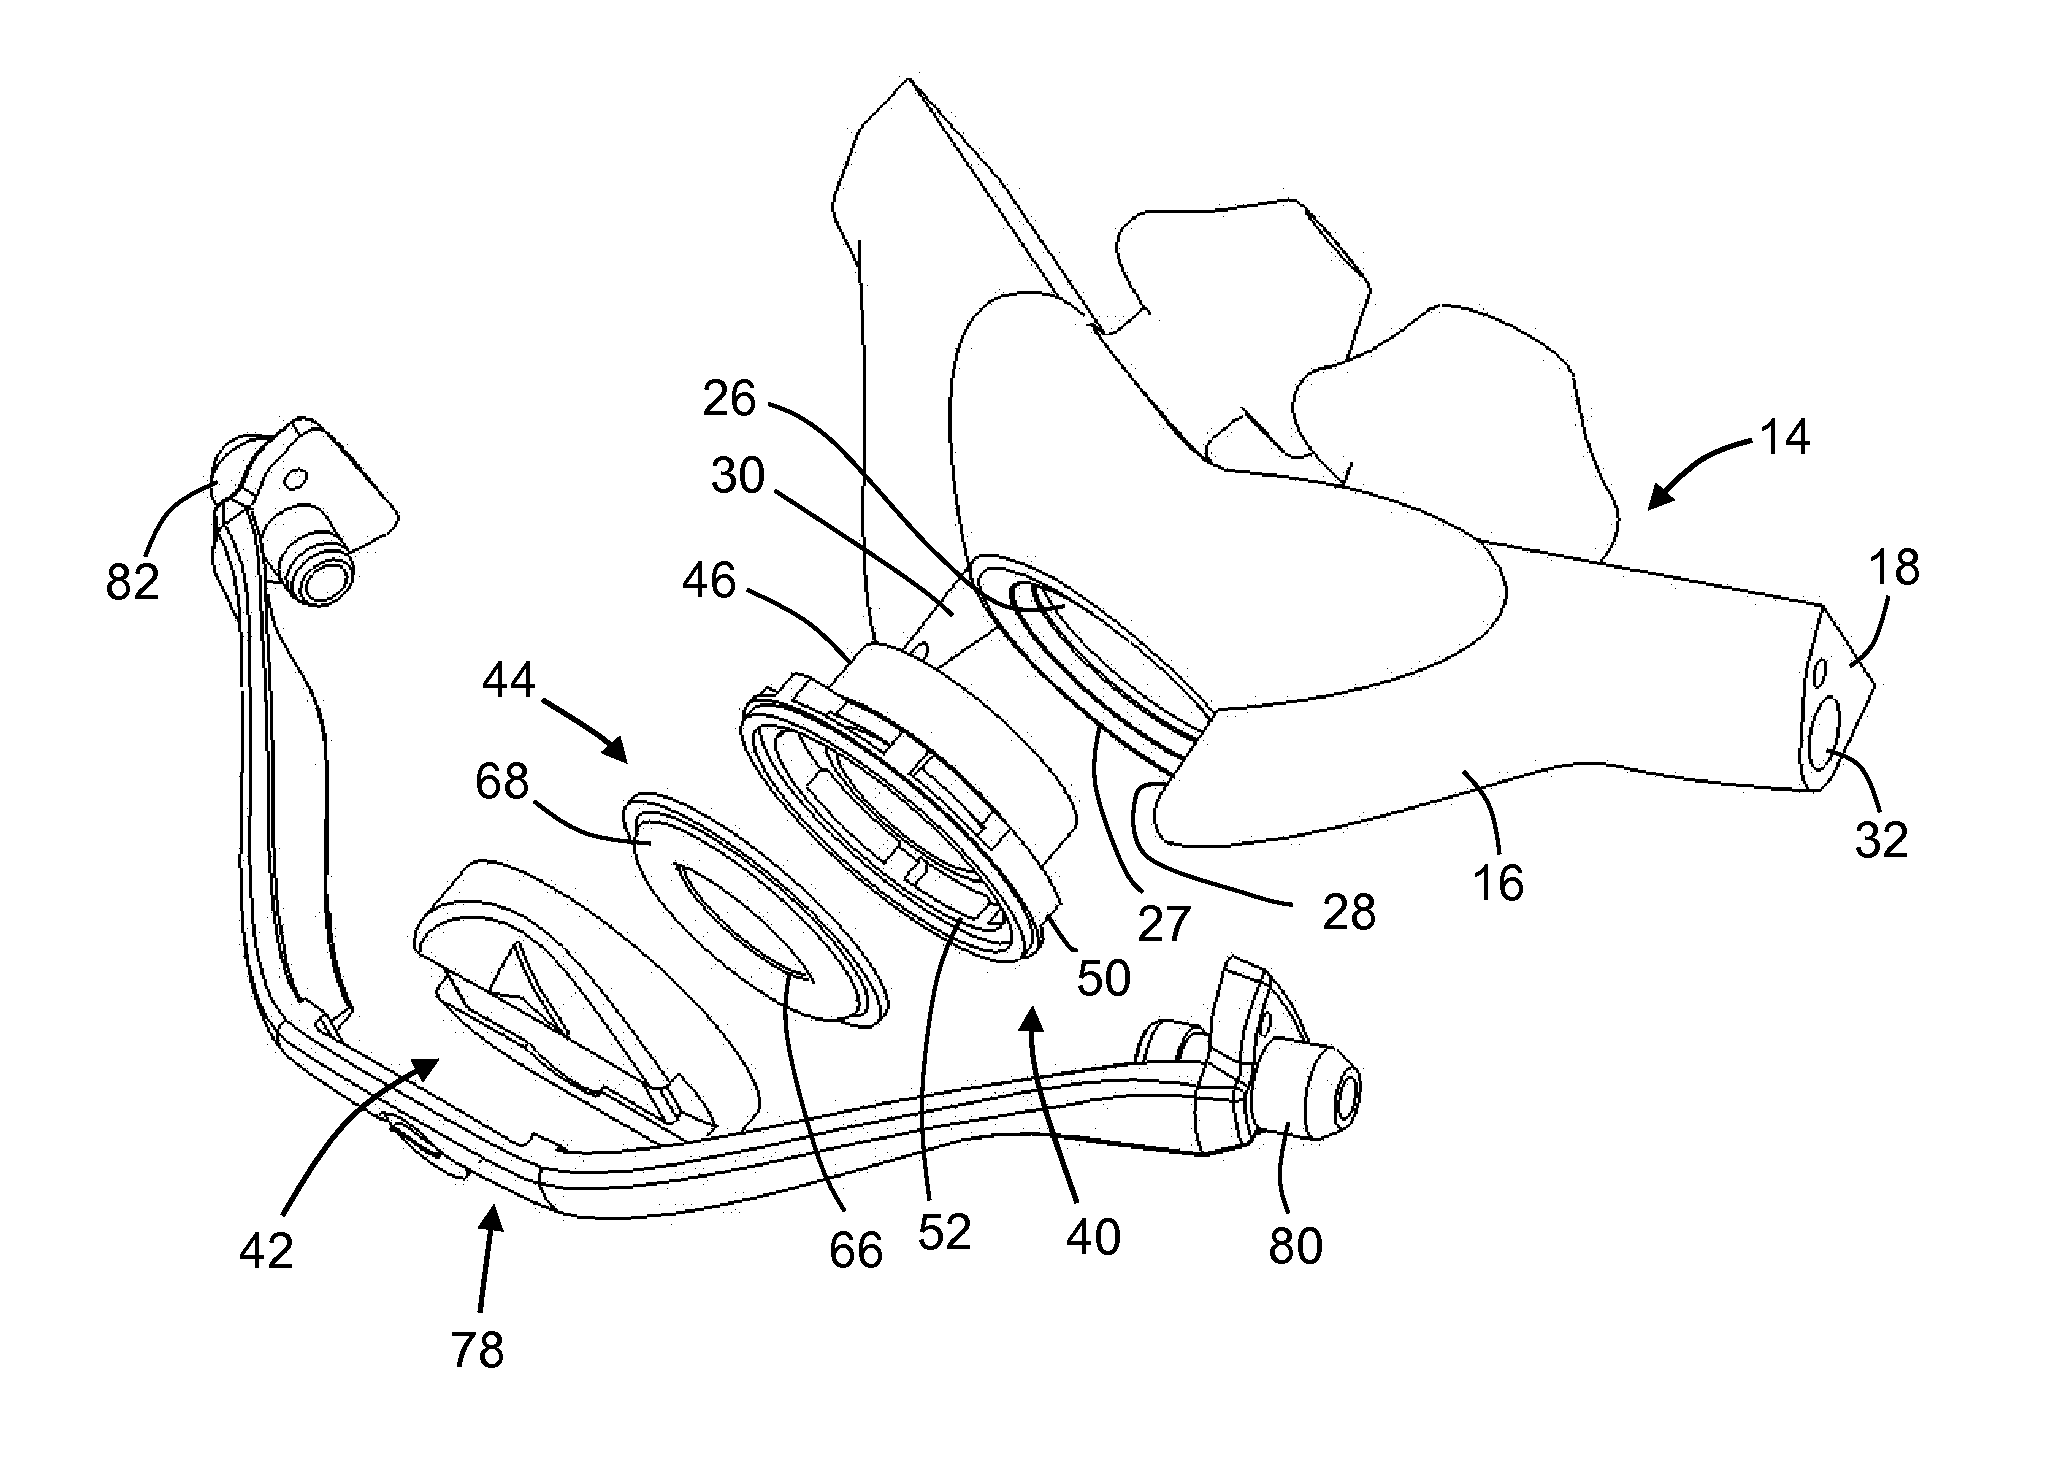 Ventilation mask with integrated piloted exalation valve